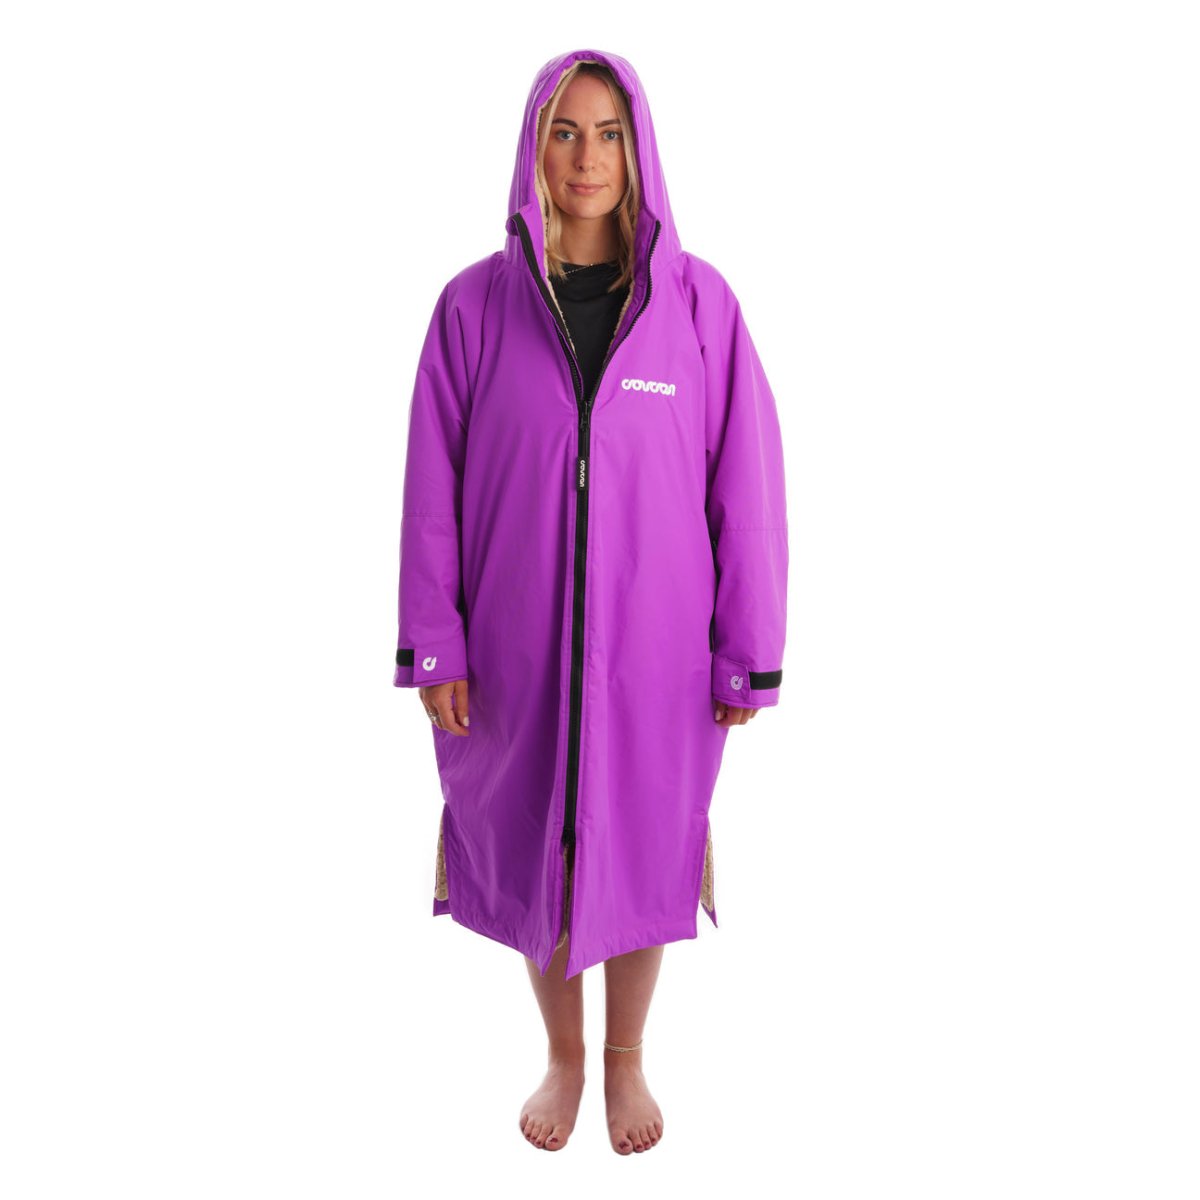 COUCON CHANGING ROBE ADULT LONG SLEEVE - MAGENTA PURPLE